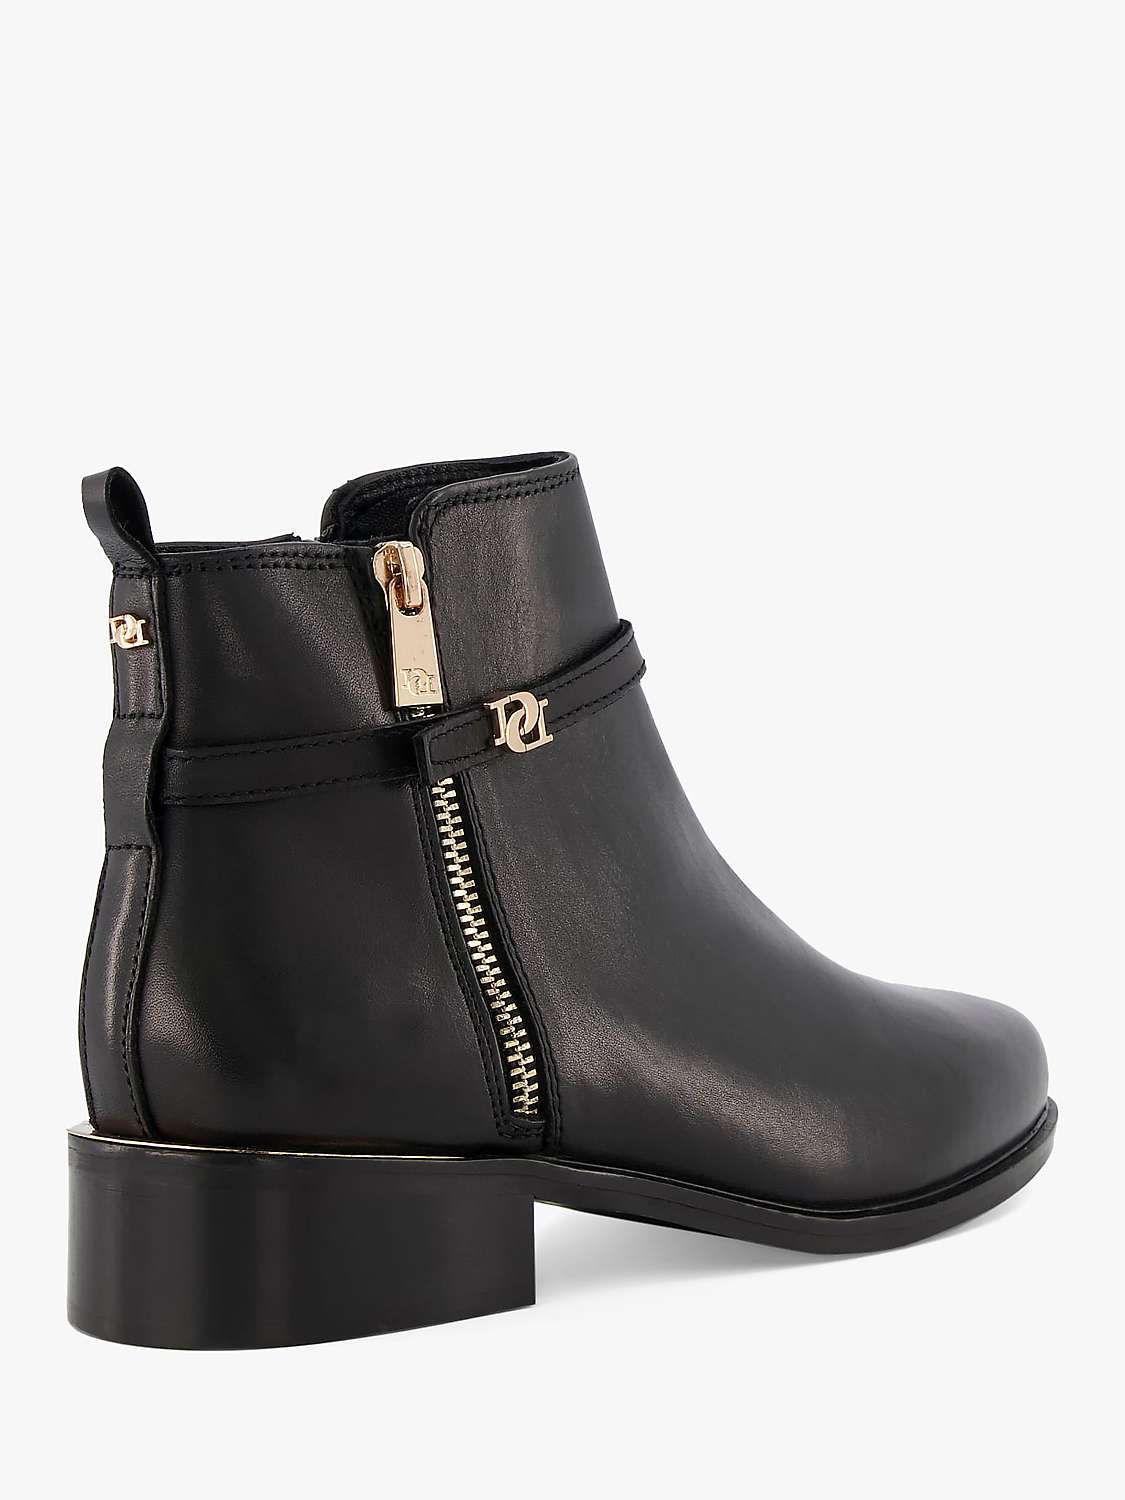 Buy Dune Pap Leather Side Zip Ankle Boots Online at johnlewis.com